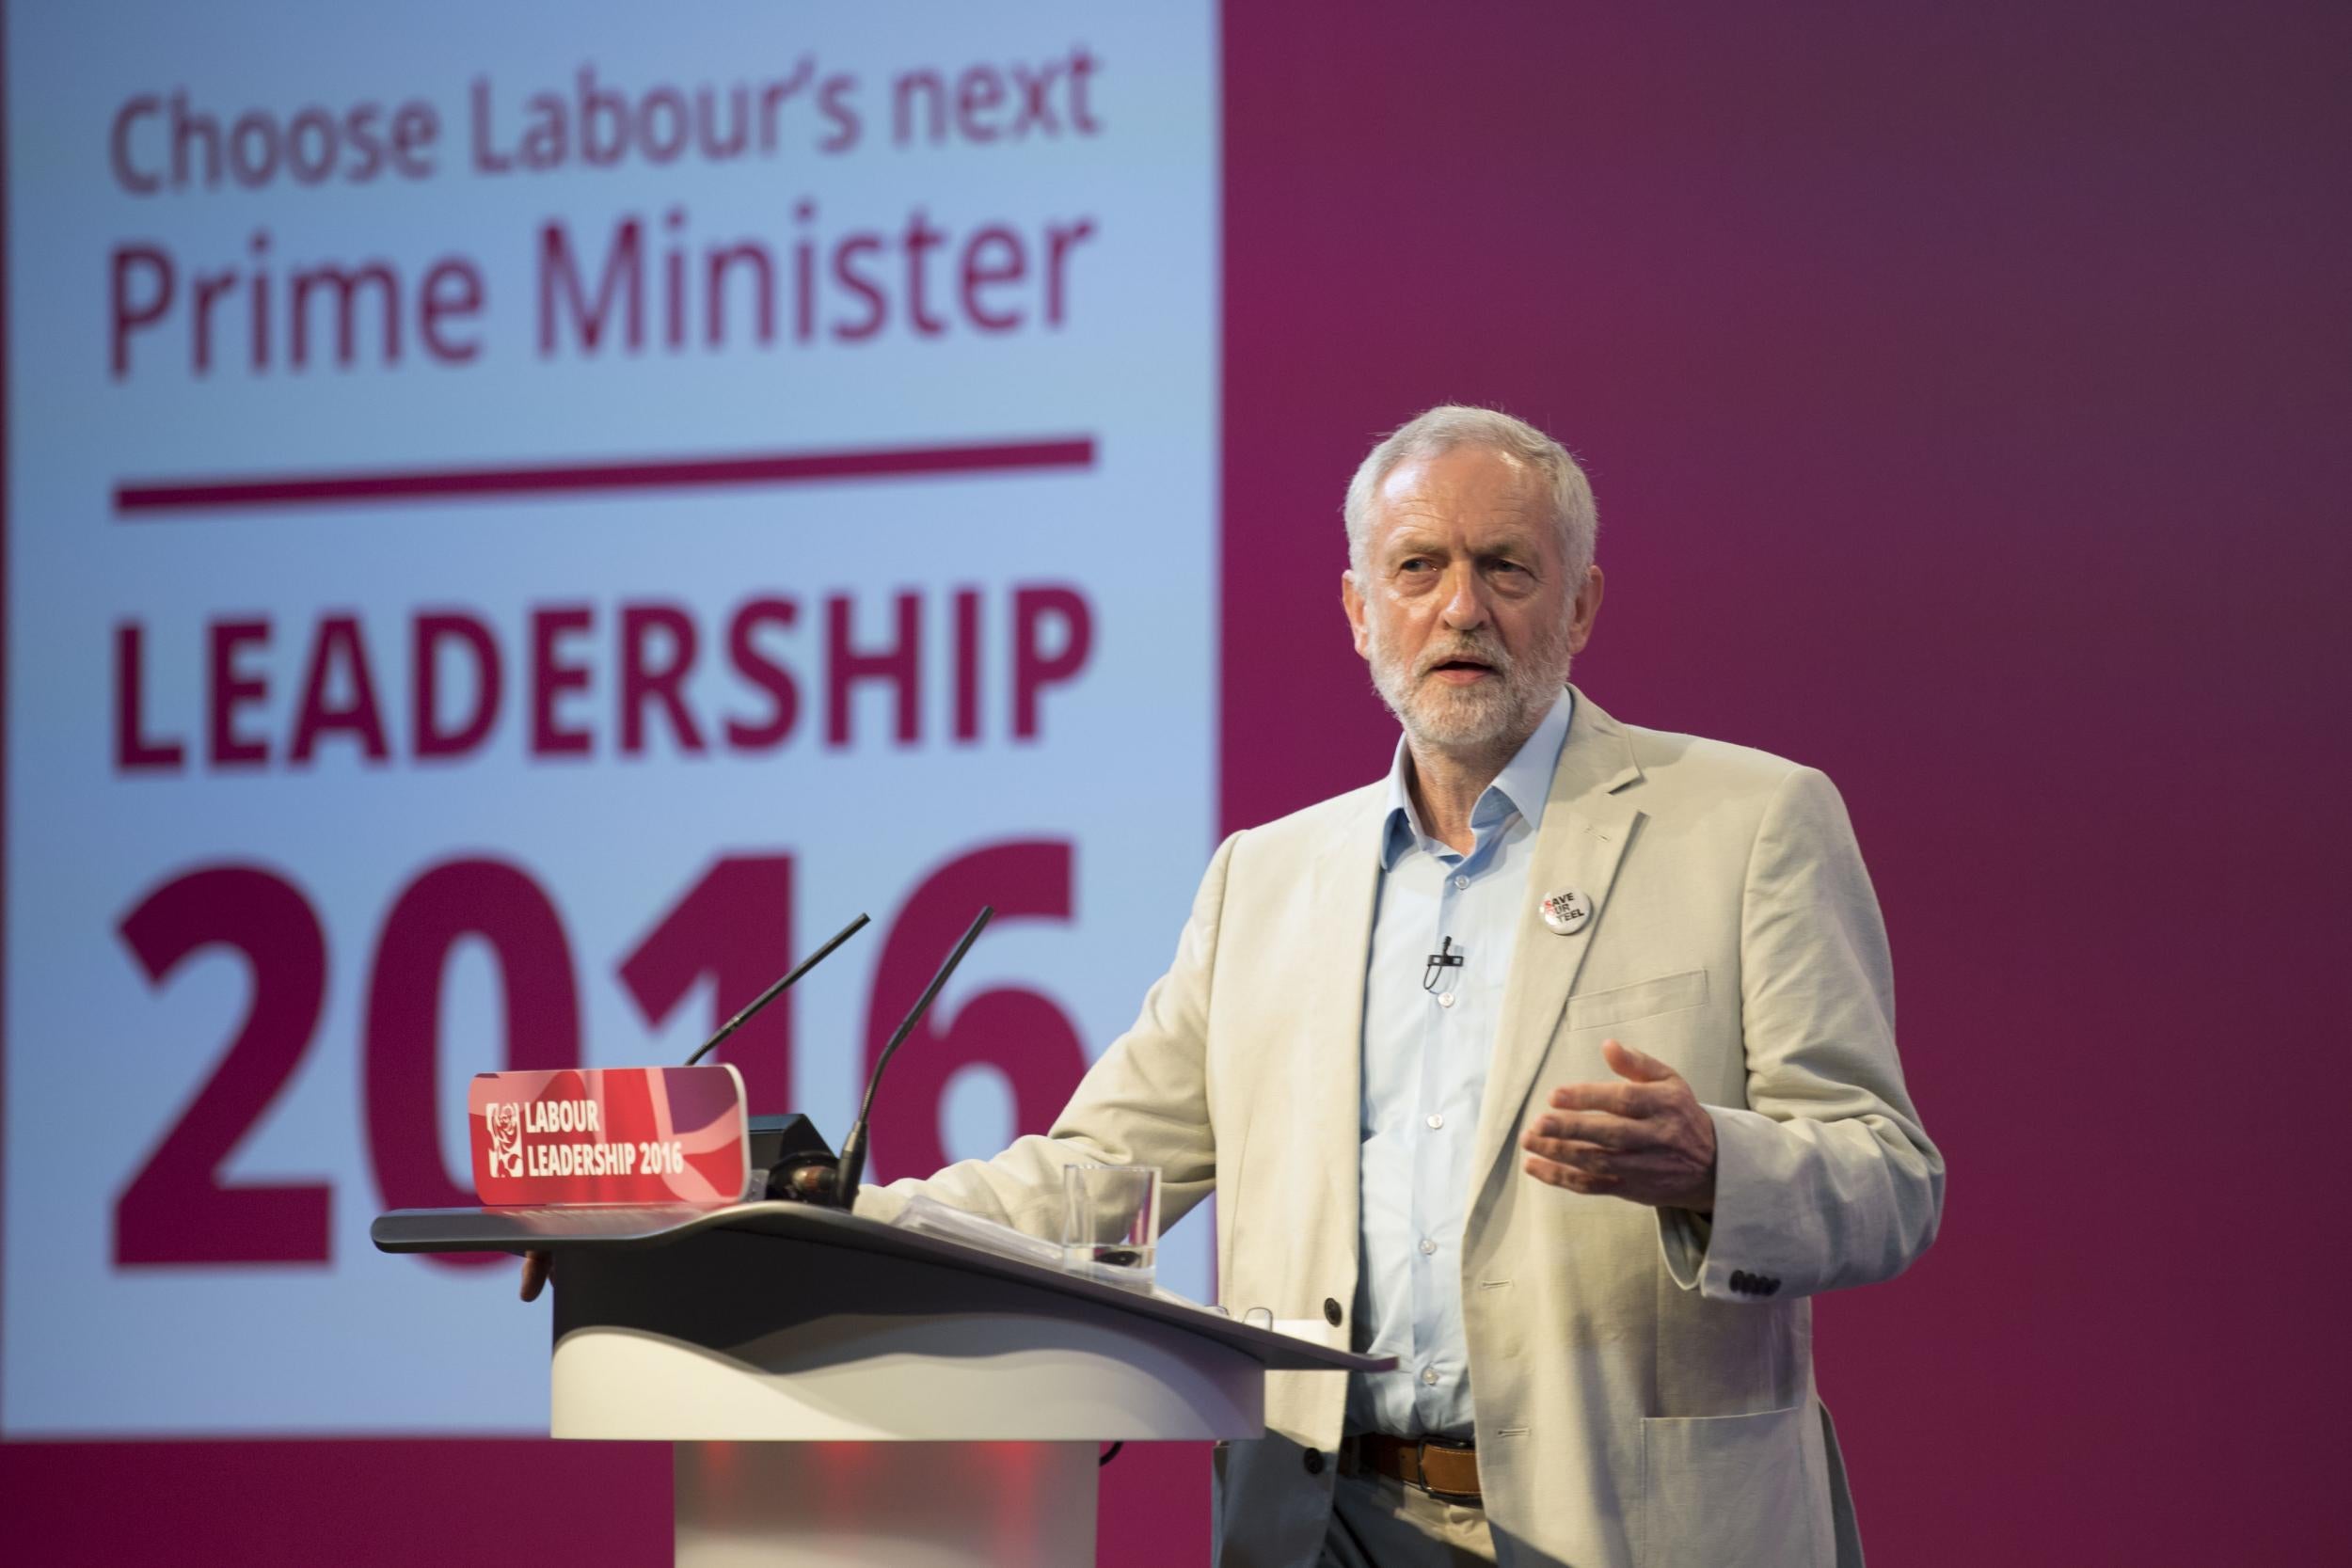 “Any Labour leader who loses an election usually goes,” John McDonnell has previously said